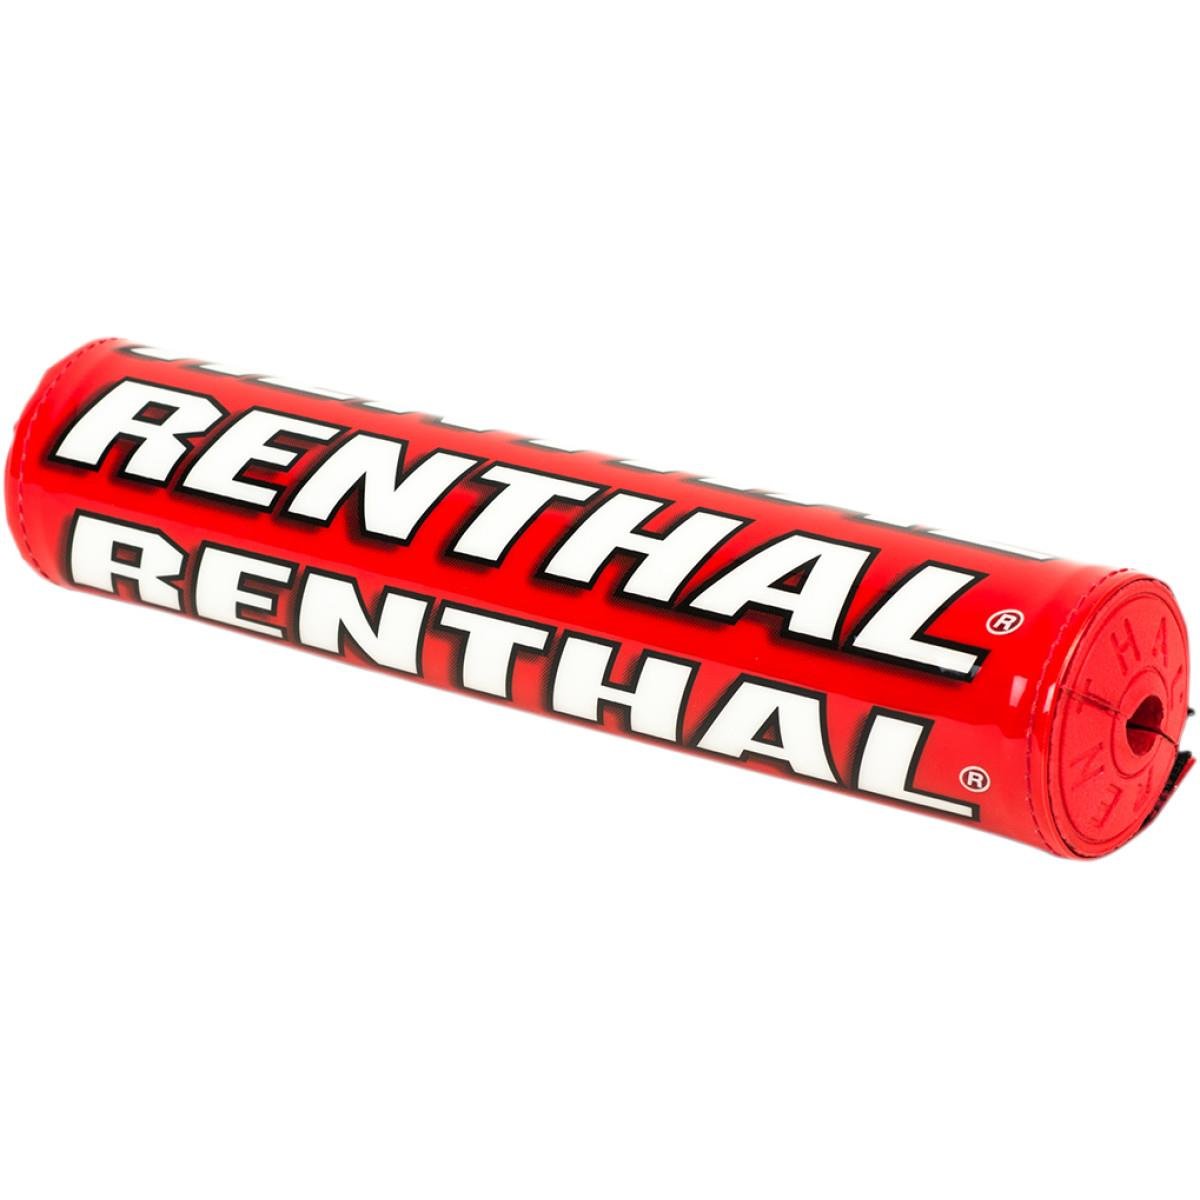 Renthal Lenkerpolster SX Rot - Limited Editon